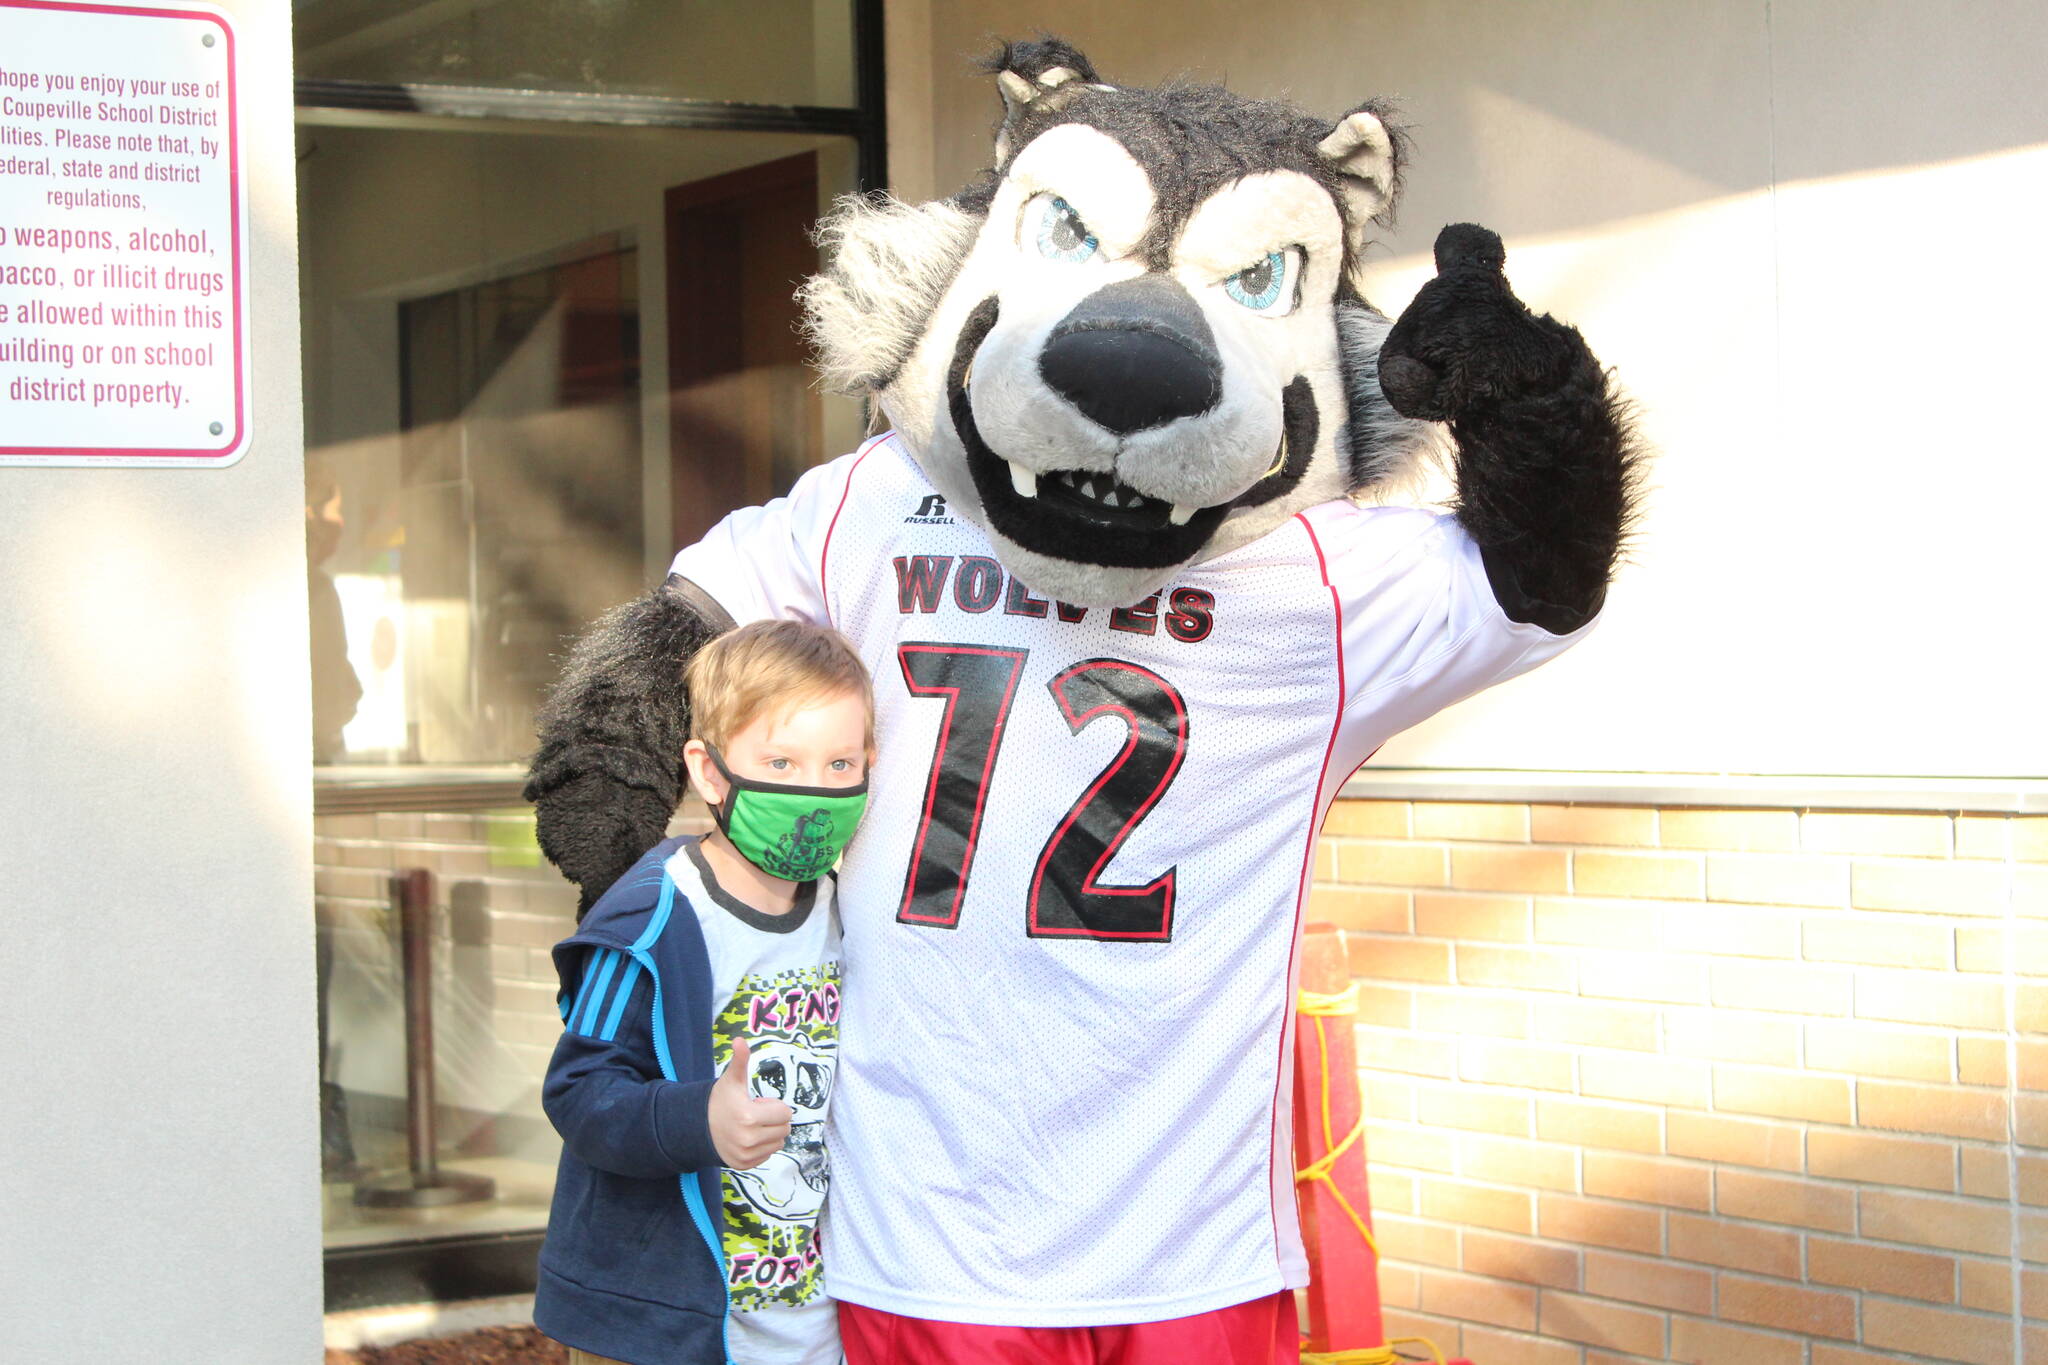 Quinton Freeman stops for a picture with the wolf pup mascot. (Photo by Karina Andrew/Whidbey News-Times)